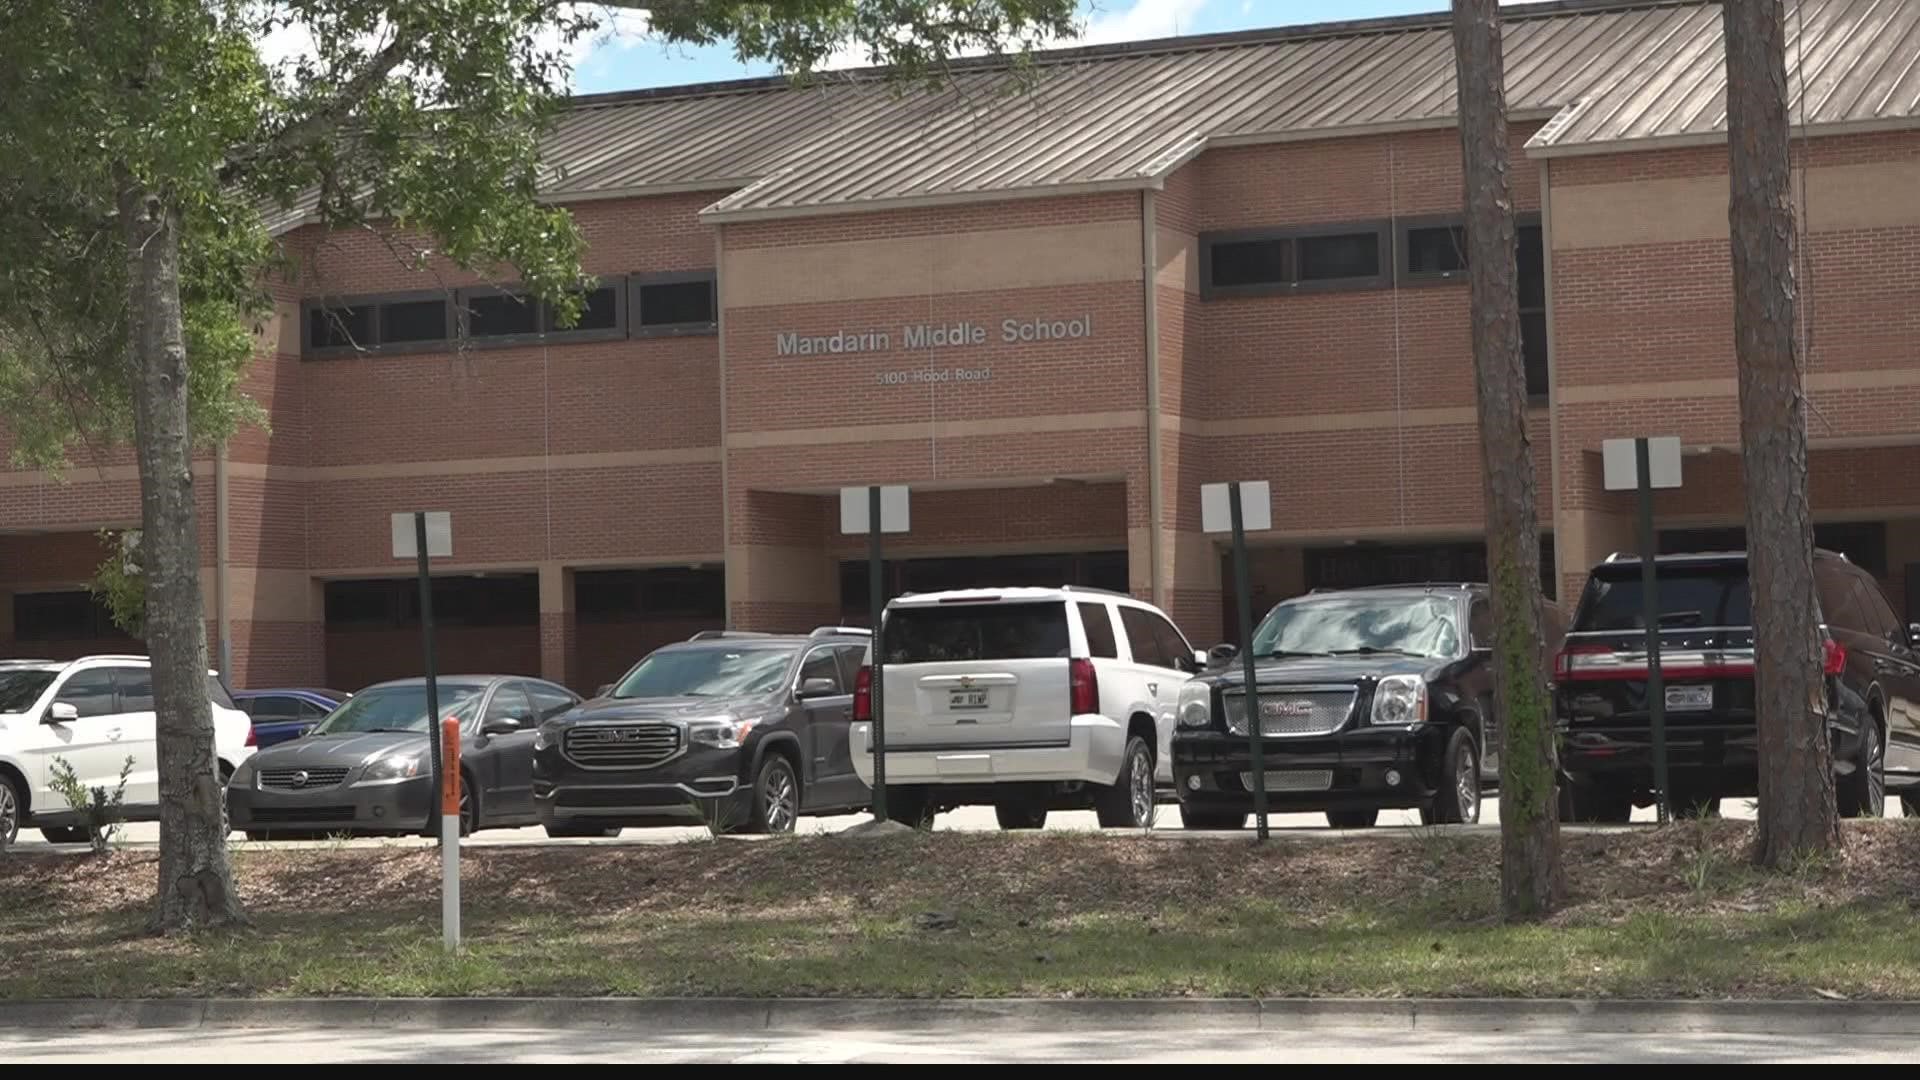 The family says a teacher at Mandarin Middle School in Jacksonville called the child the N word in front of other students.